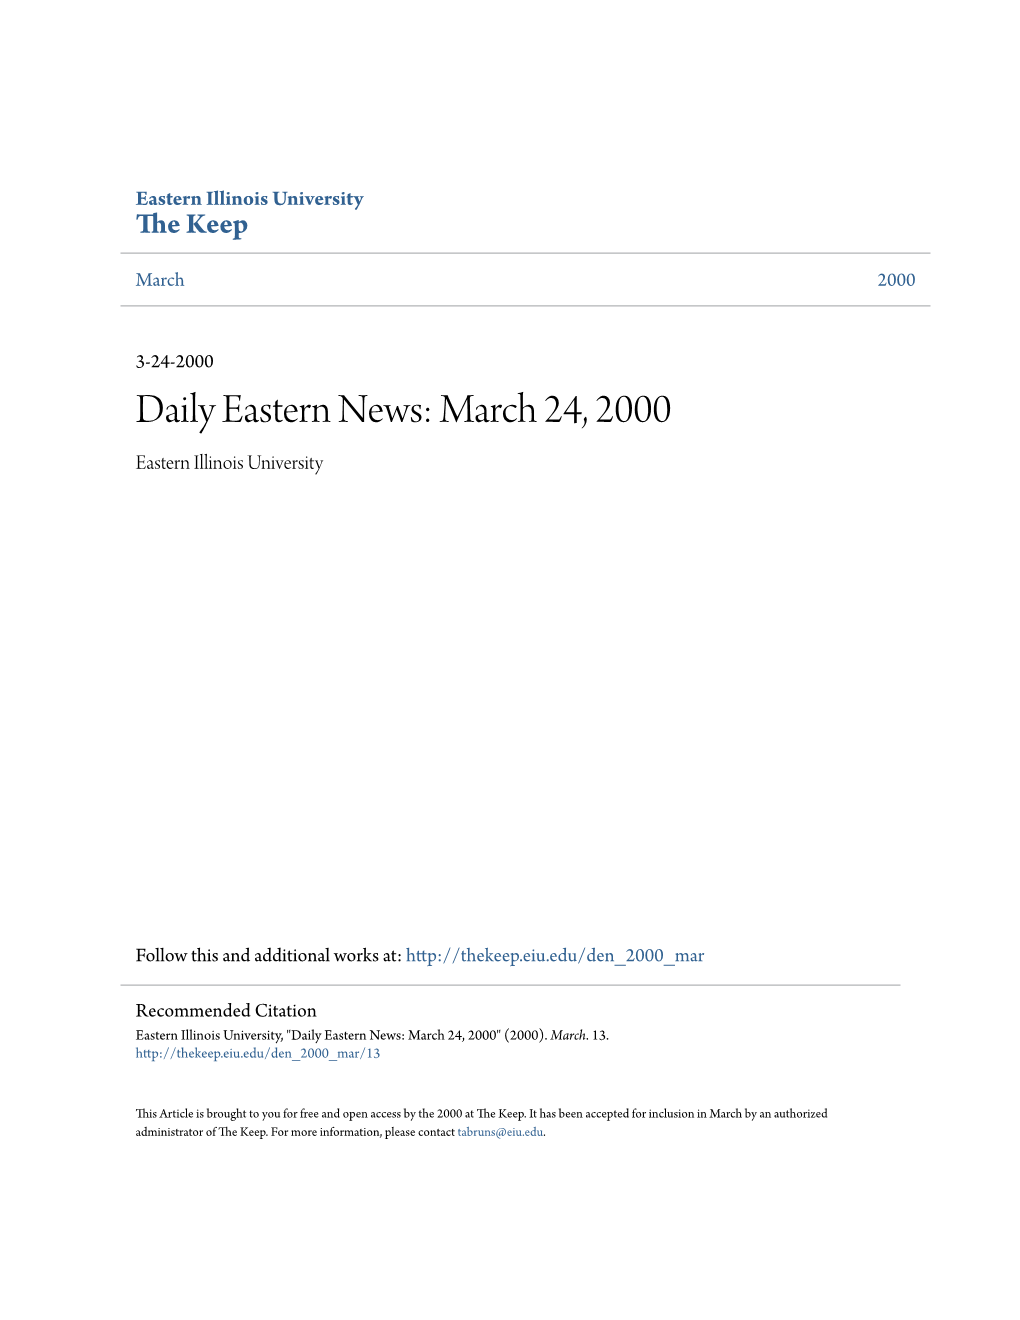 Daily Eastern News: March 24, 2000 Eastern Illinois University